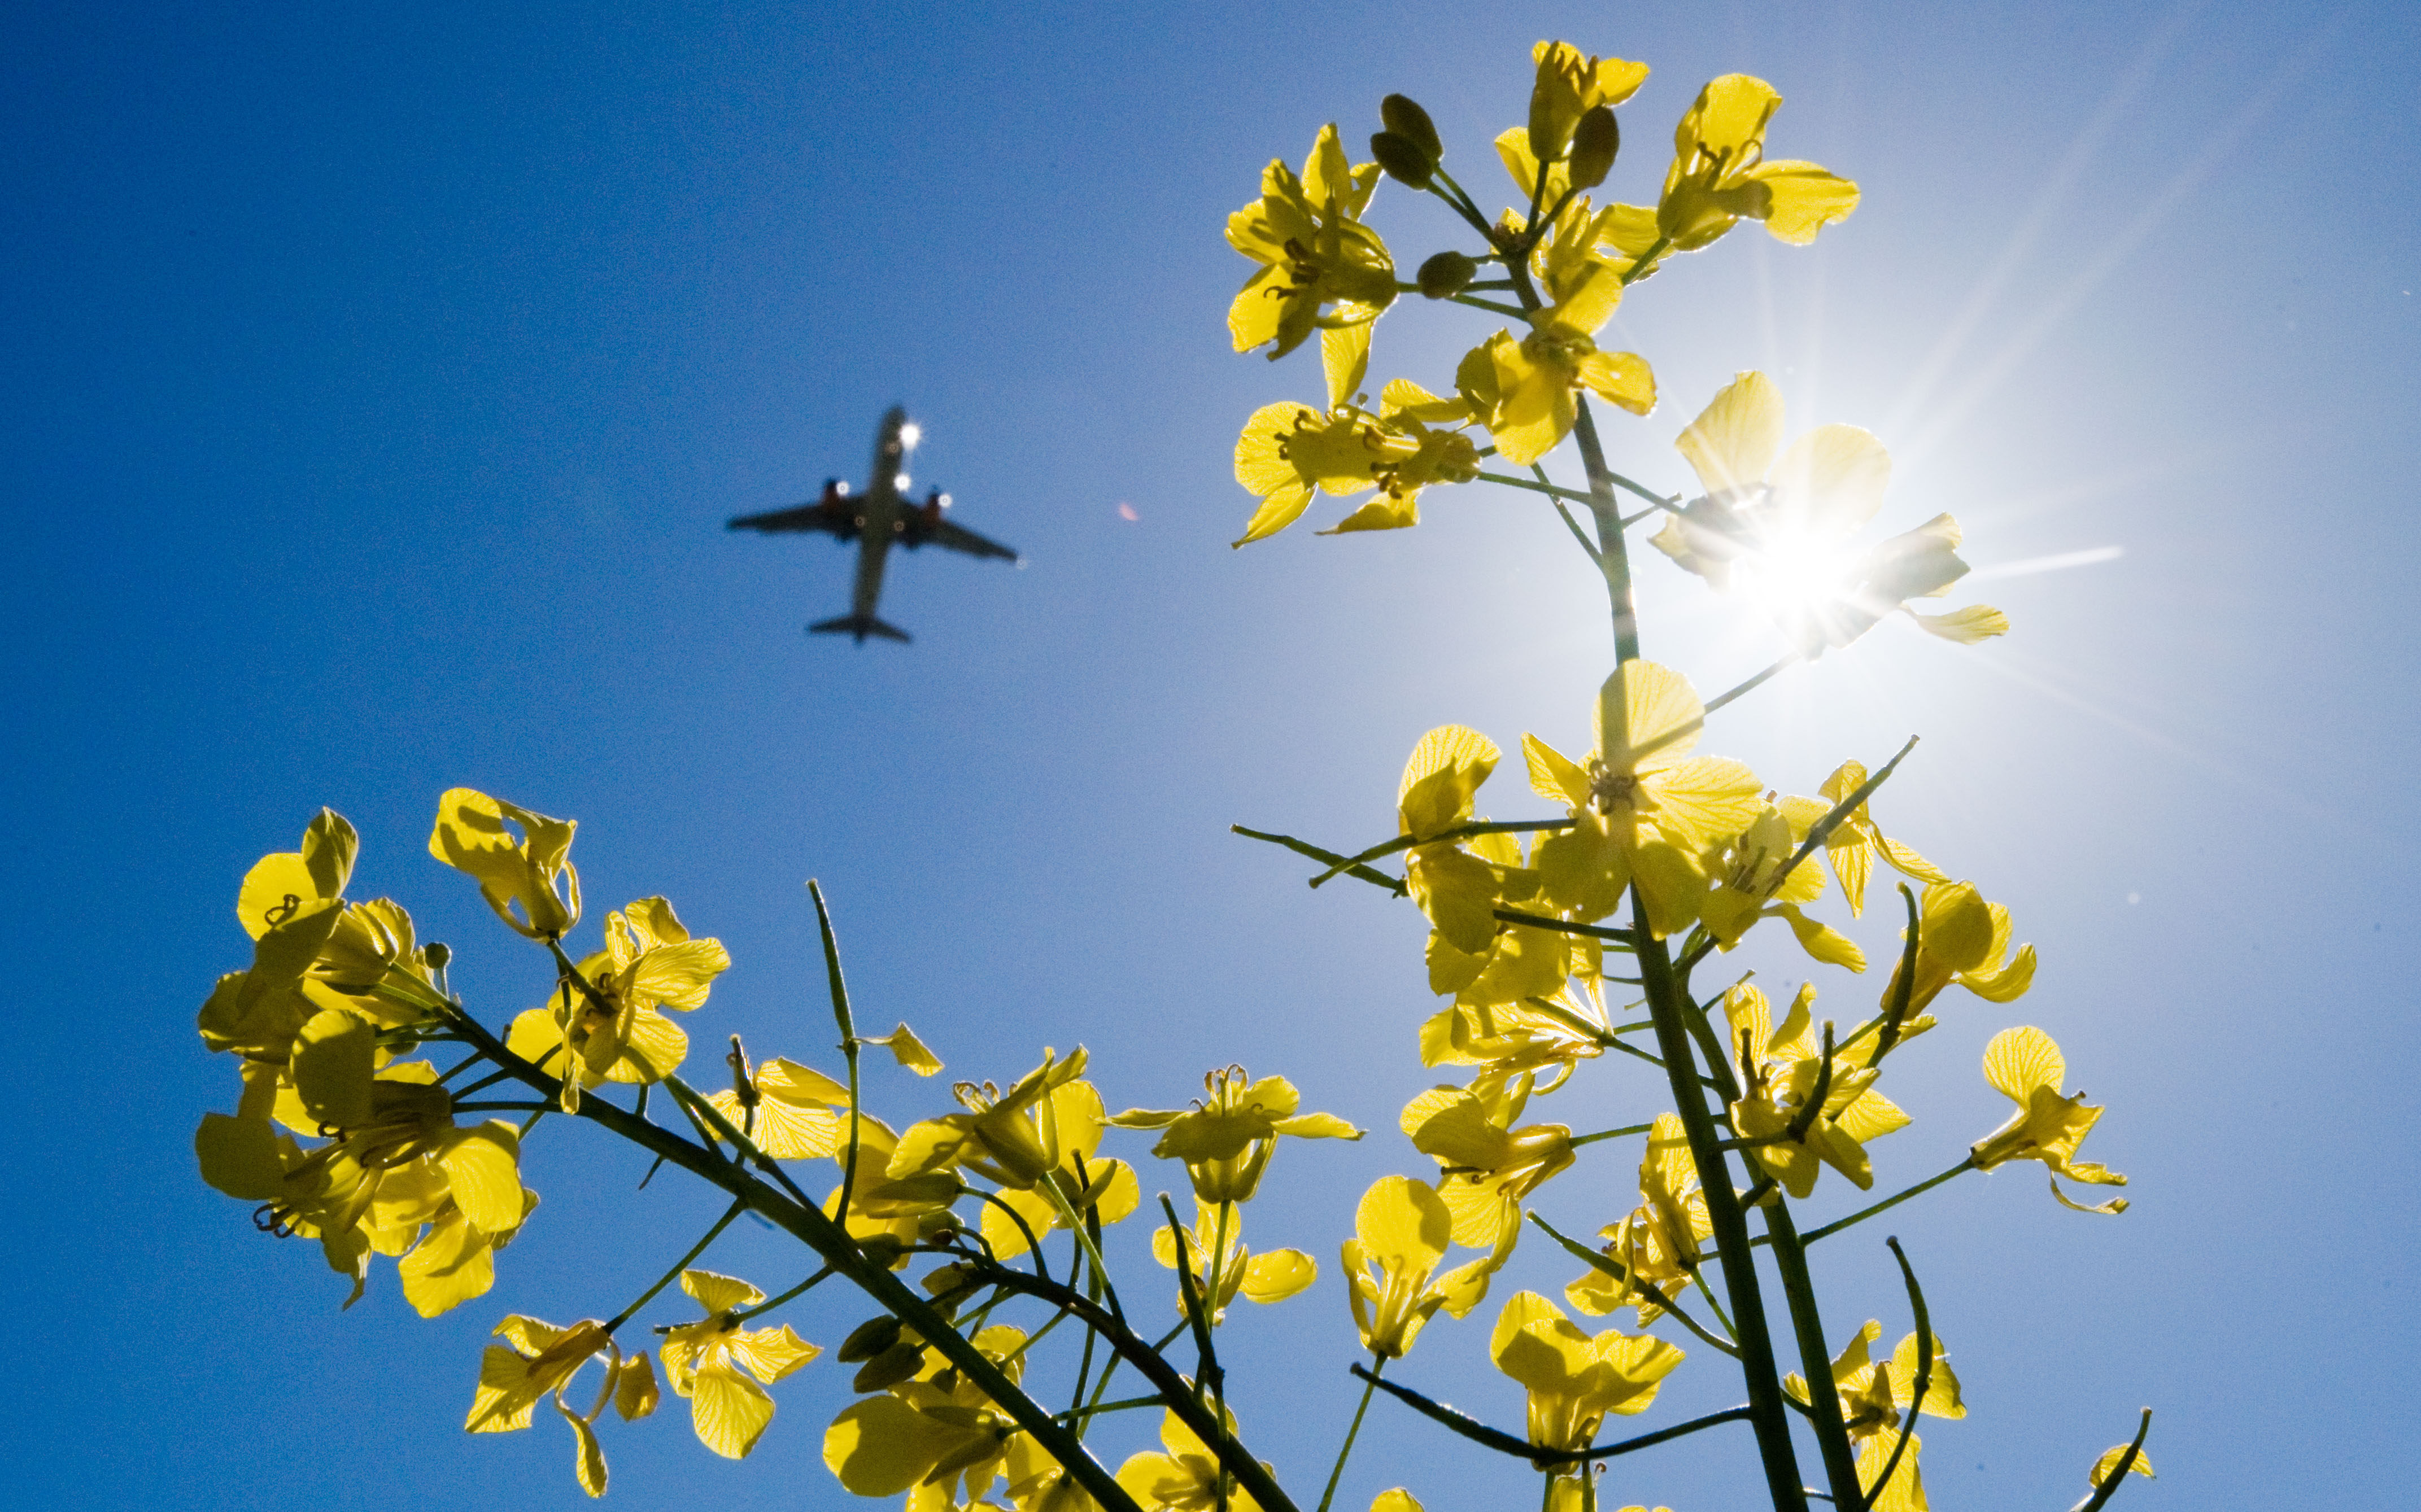 Sustainable aviation fuels (SAFs), derived from biological or synthetic feedstocks, offer a solution for a world hooked on air travel but imperilled by climate breakdown. Photo: Picture Alliance via Getty Images